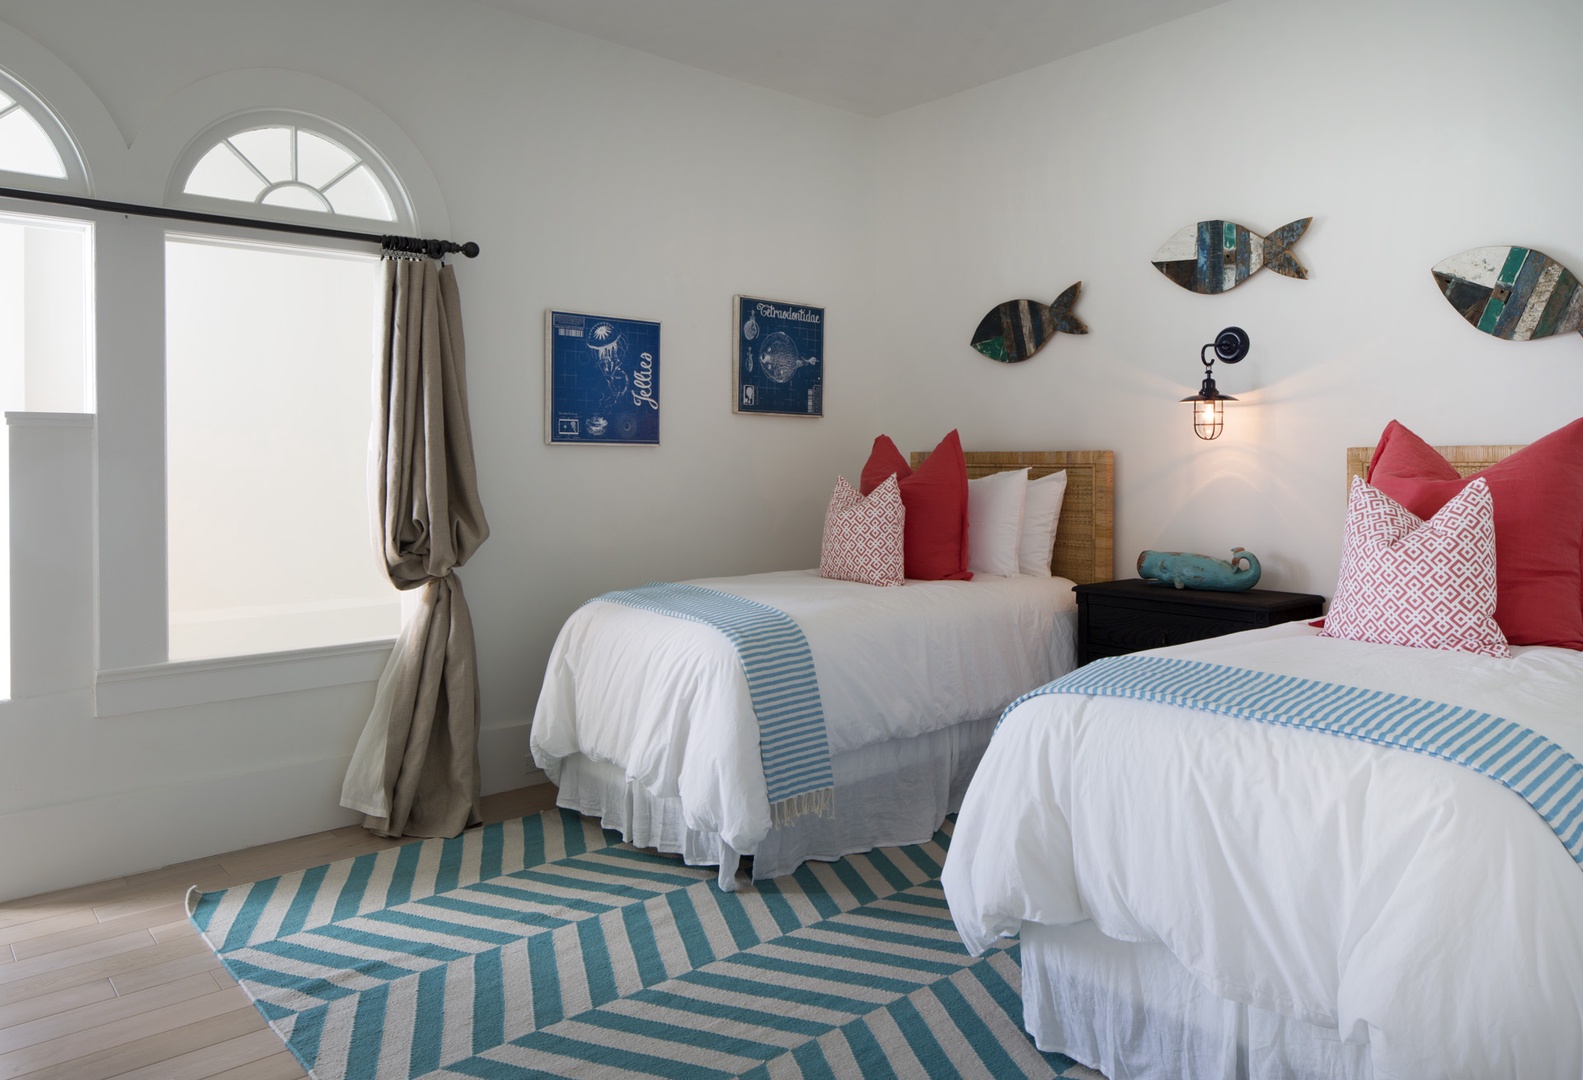 Kailua Vacation Rentals, Lanikai Village* - The Villa at Wailea Point: Guest bedroom with two twin beds and coastal decor.